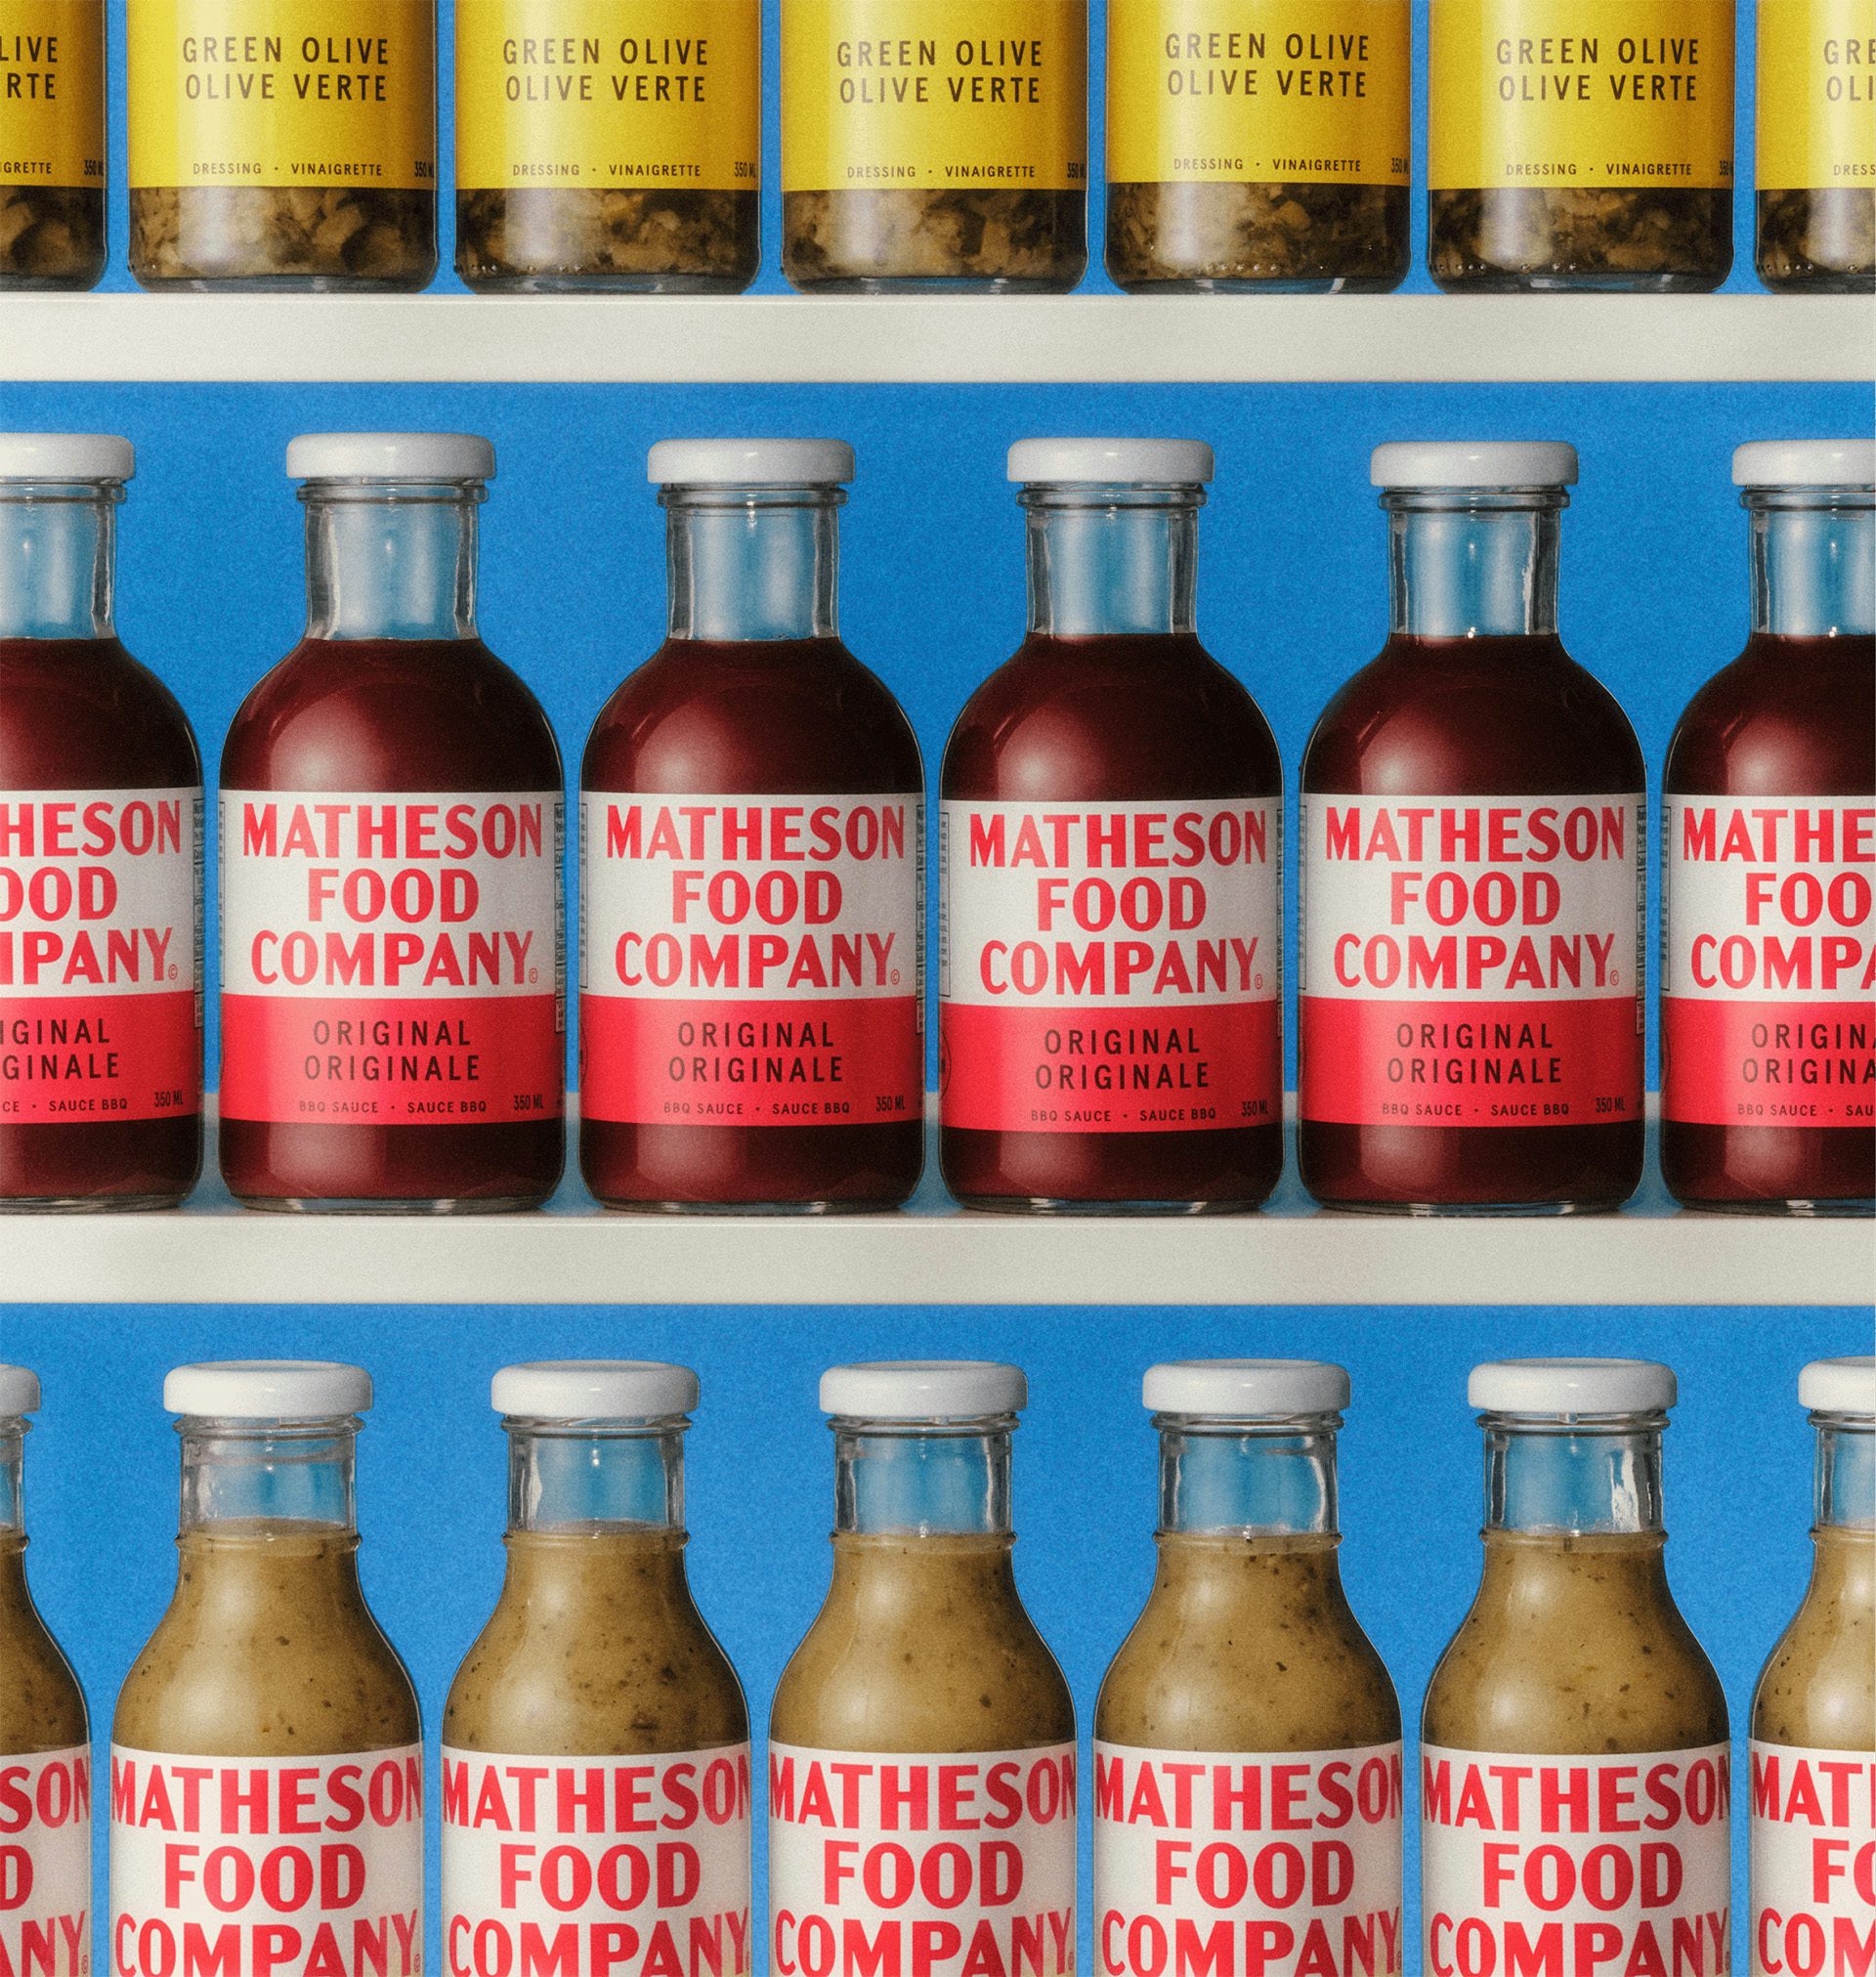 Image shows three rows of sauce bottles labelled with the new Matheson Food Company branding, which features a red uppercase wordmark